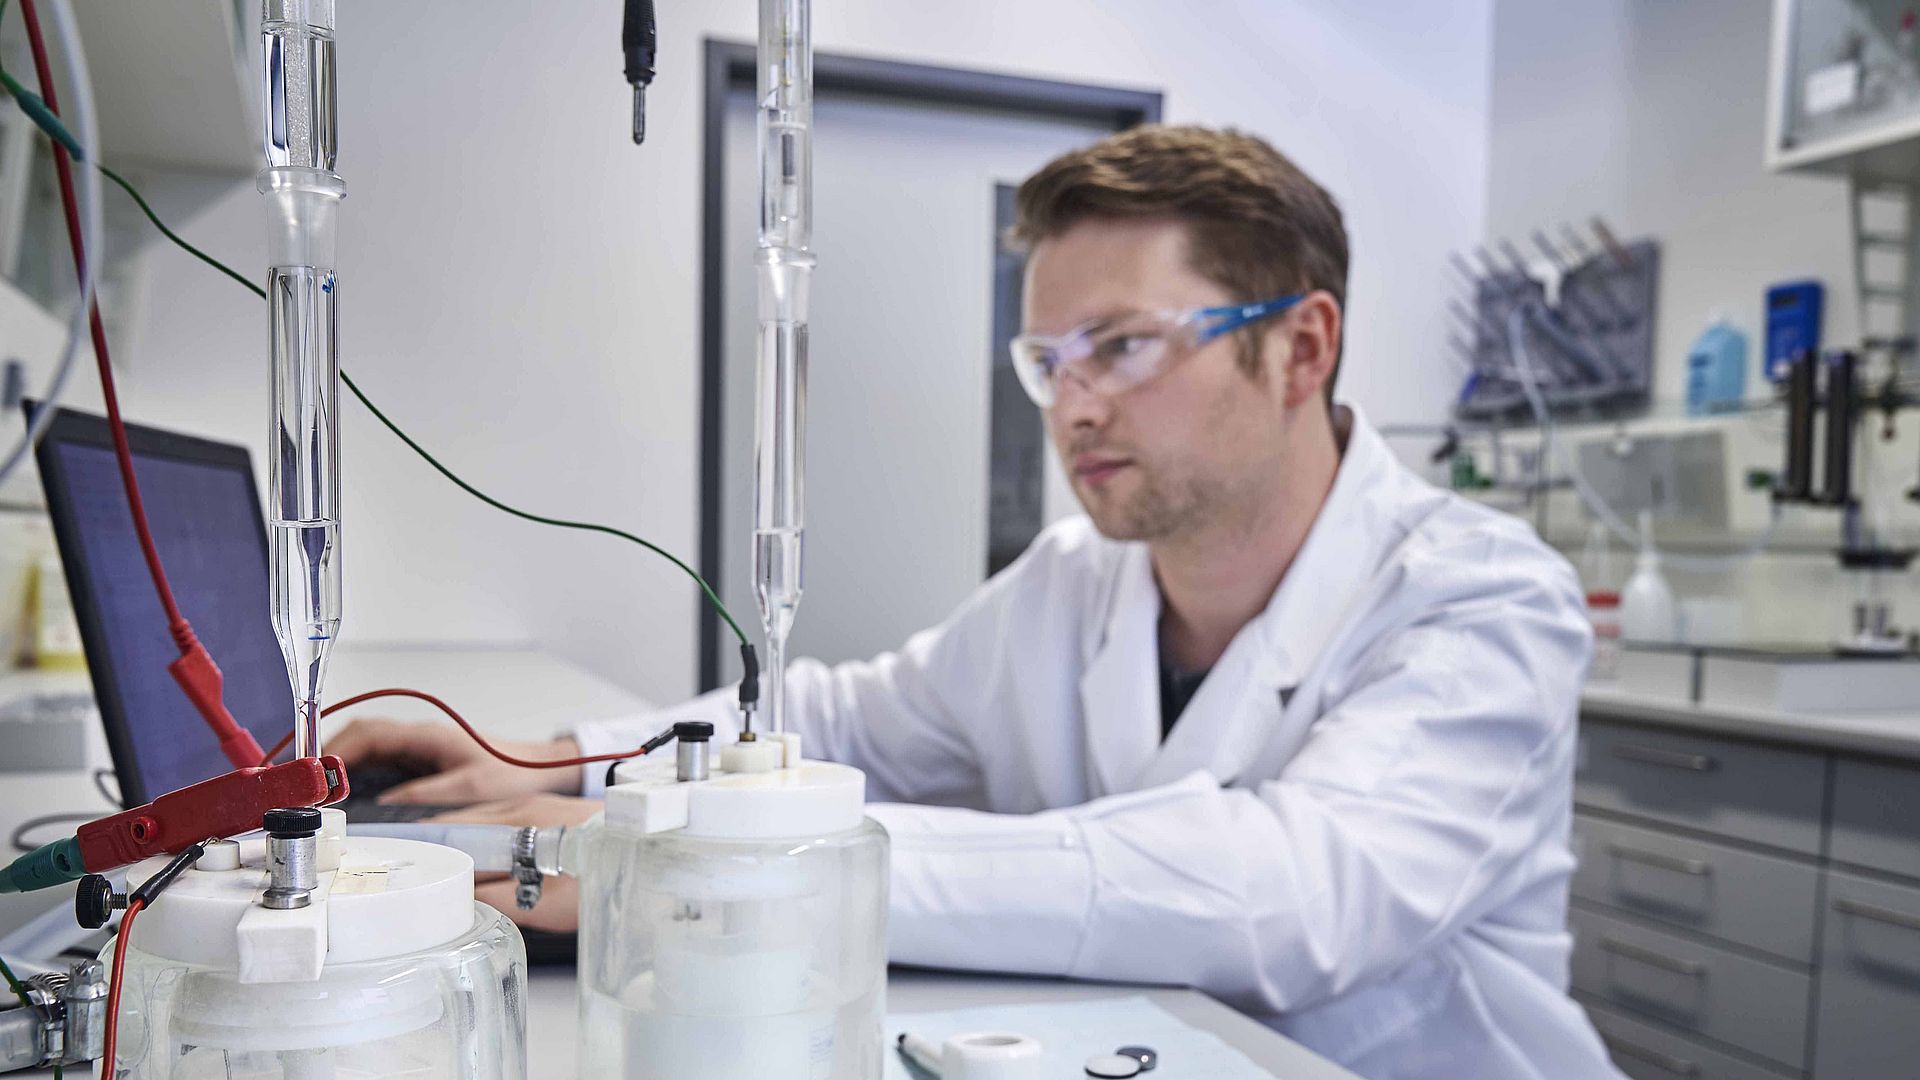 A man with safety goggles and a lab coat sits in a laboratory